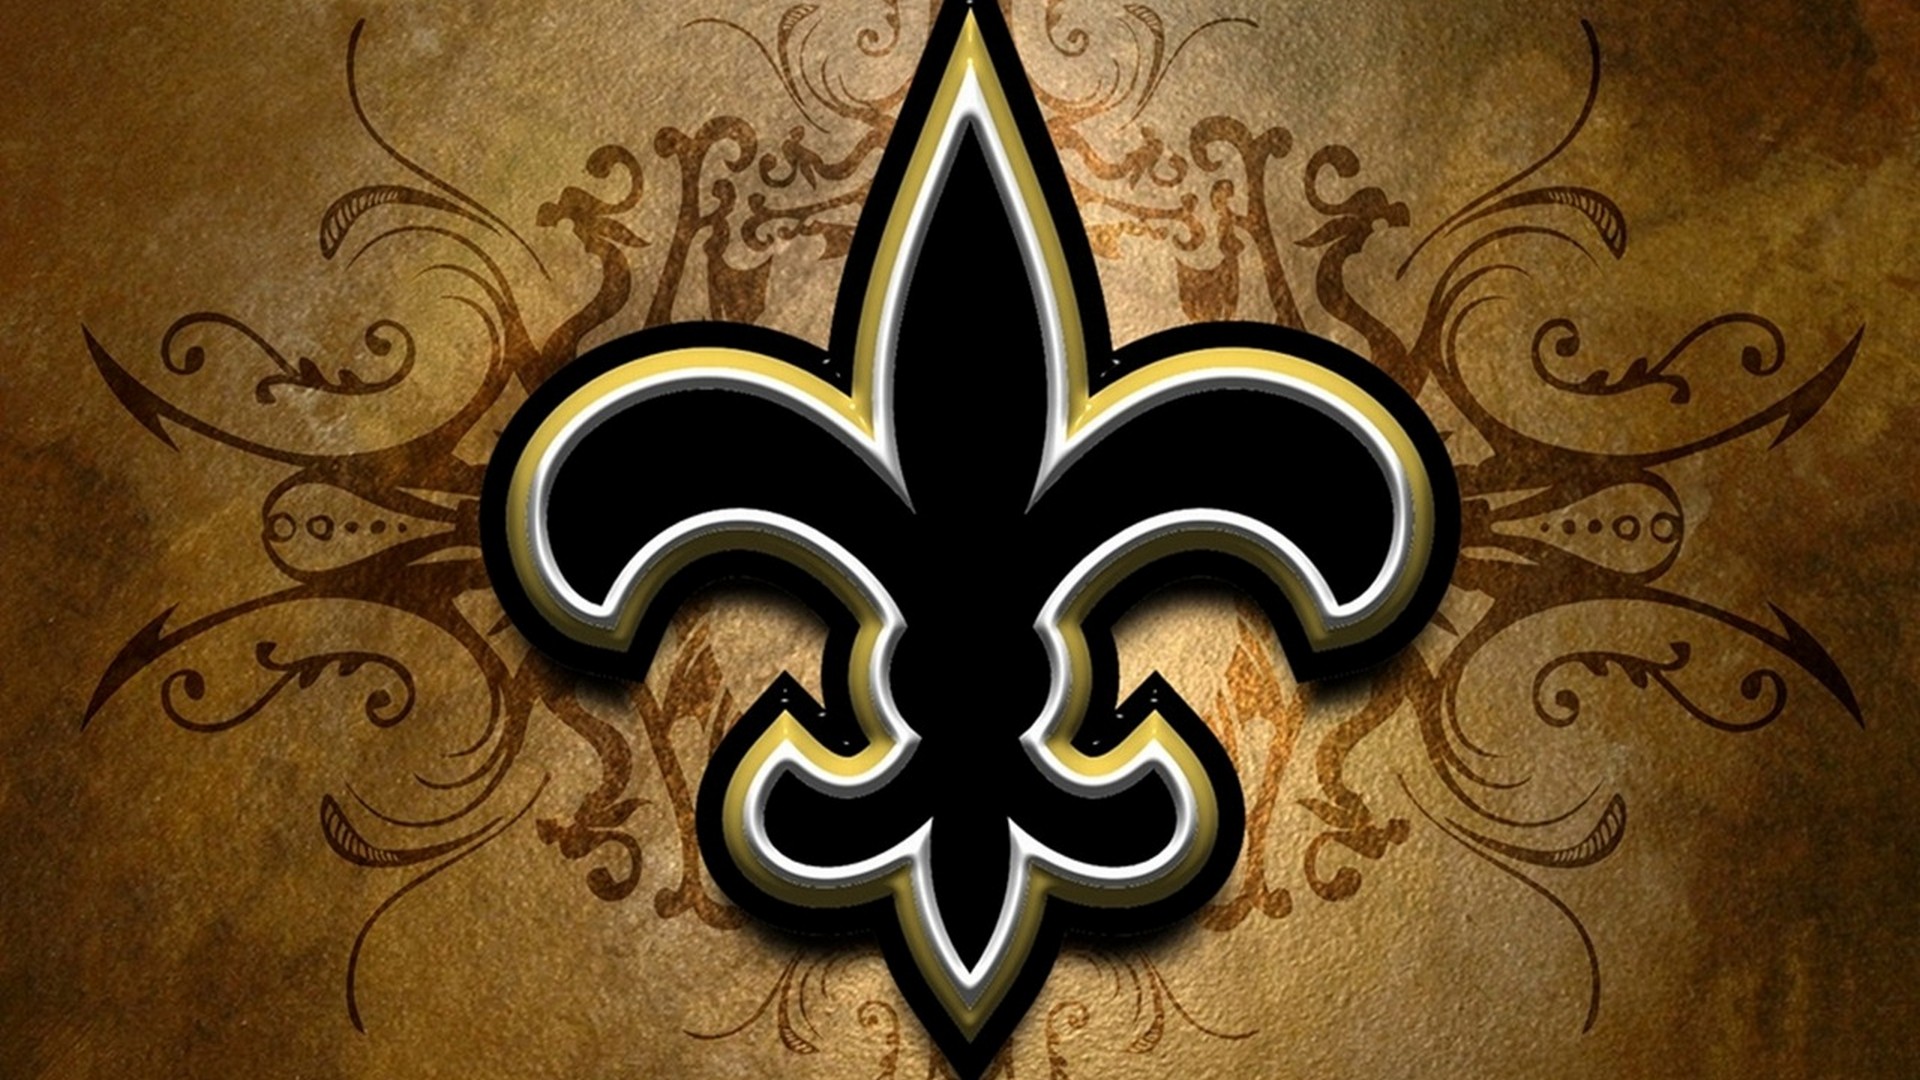 Windows Wallpaper New Orleans Saints with resolution 1920x1080 pixel. You can make this wallpaper for your Mac or Windows Desktop Background, iPhone, Android or Tablet and another Smartphone device